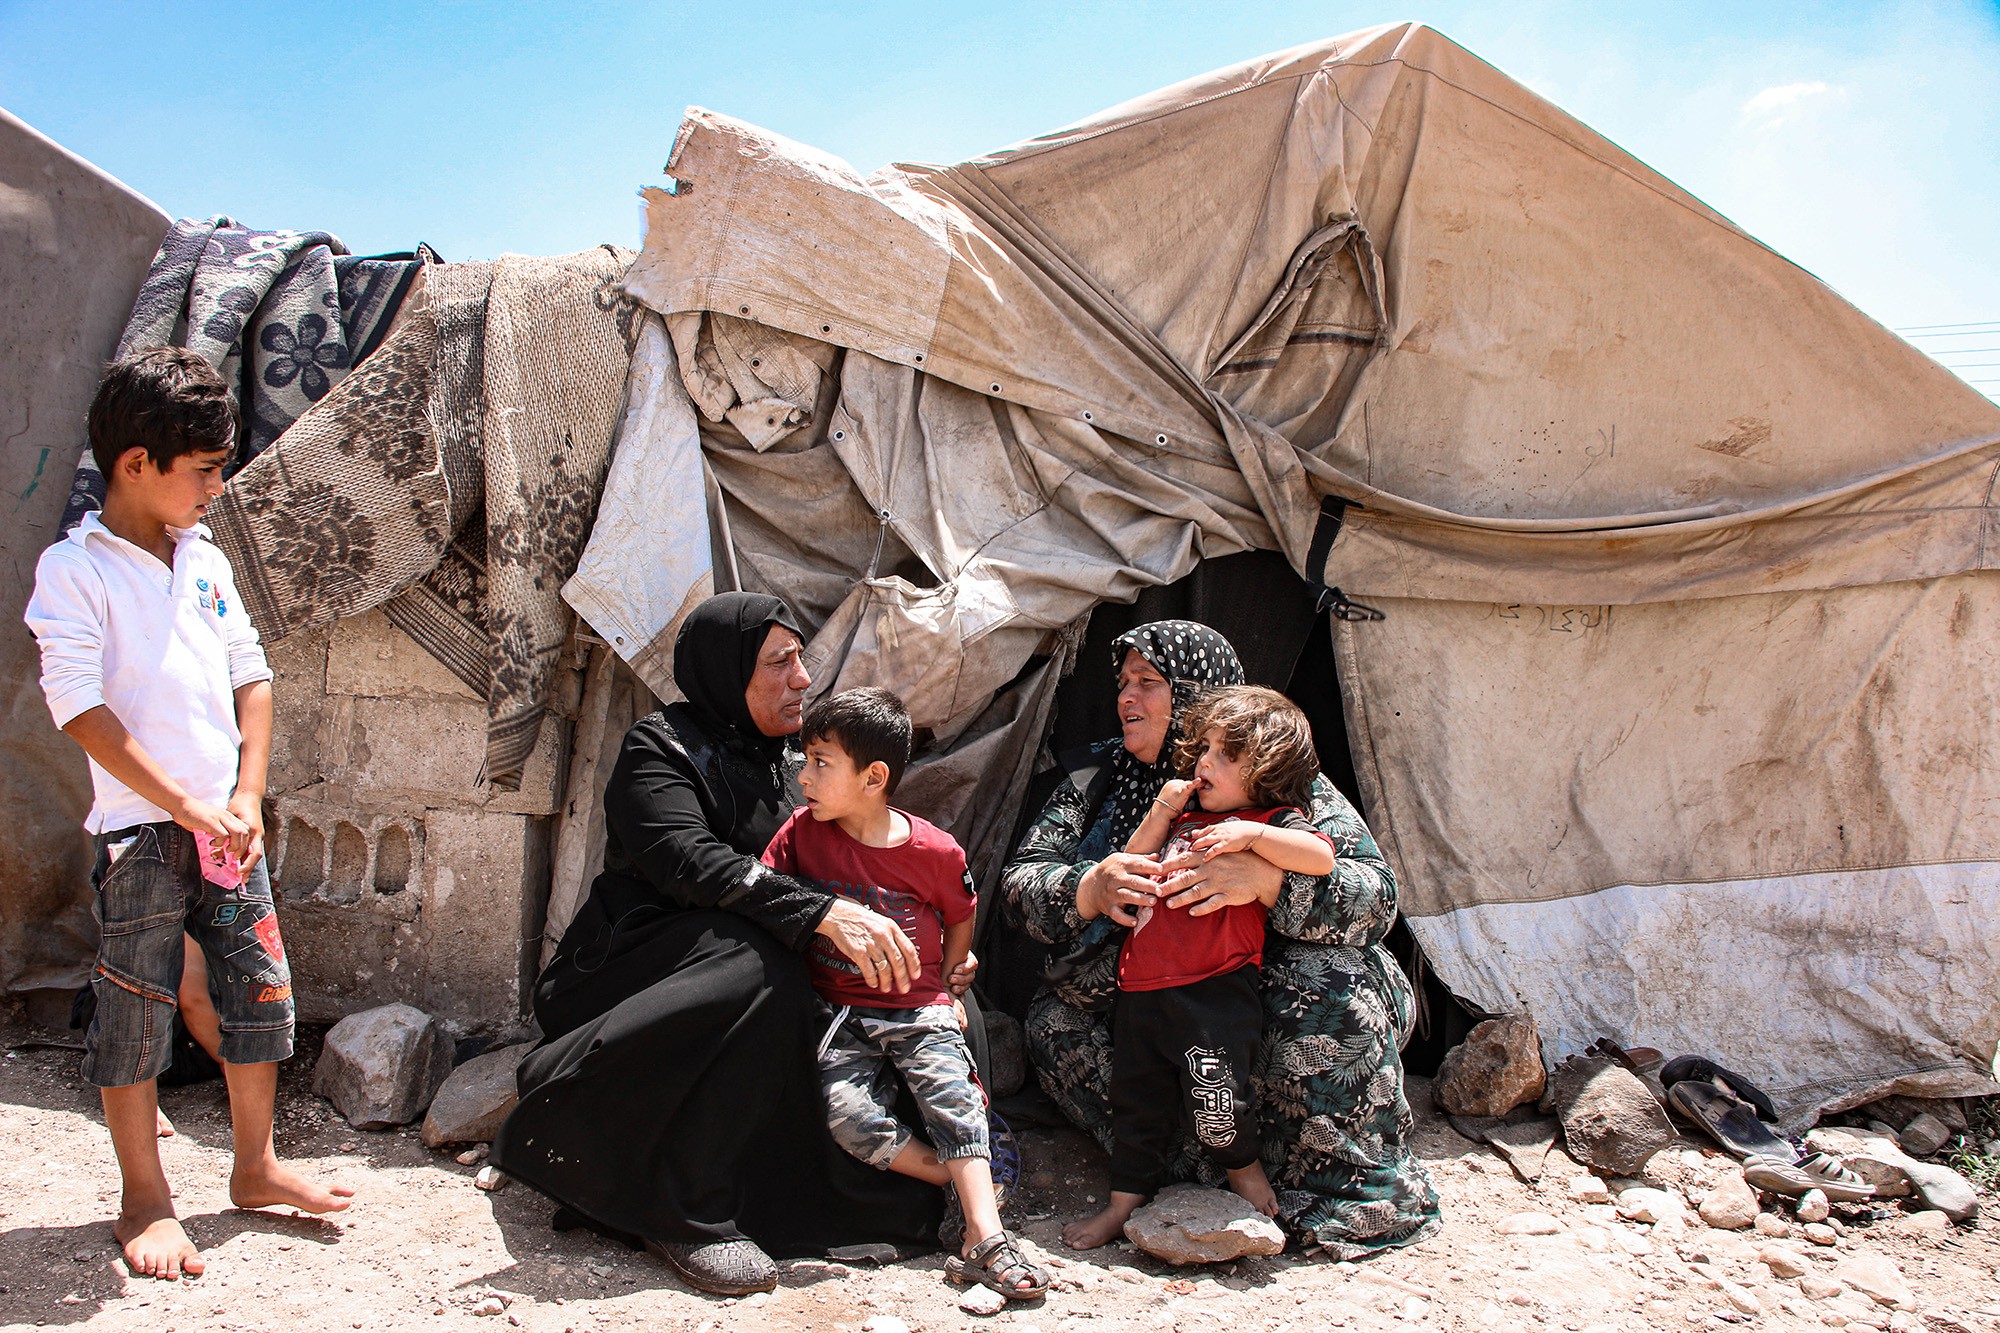 Syrian women and children in front of tent